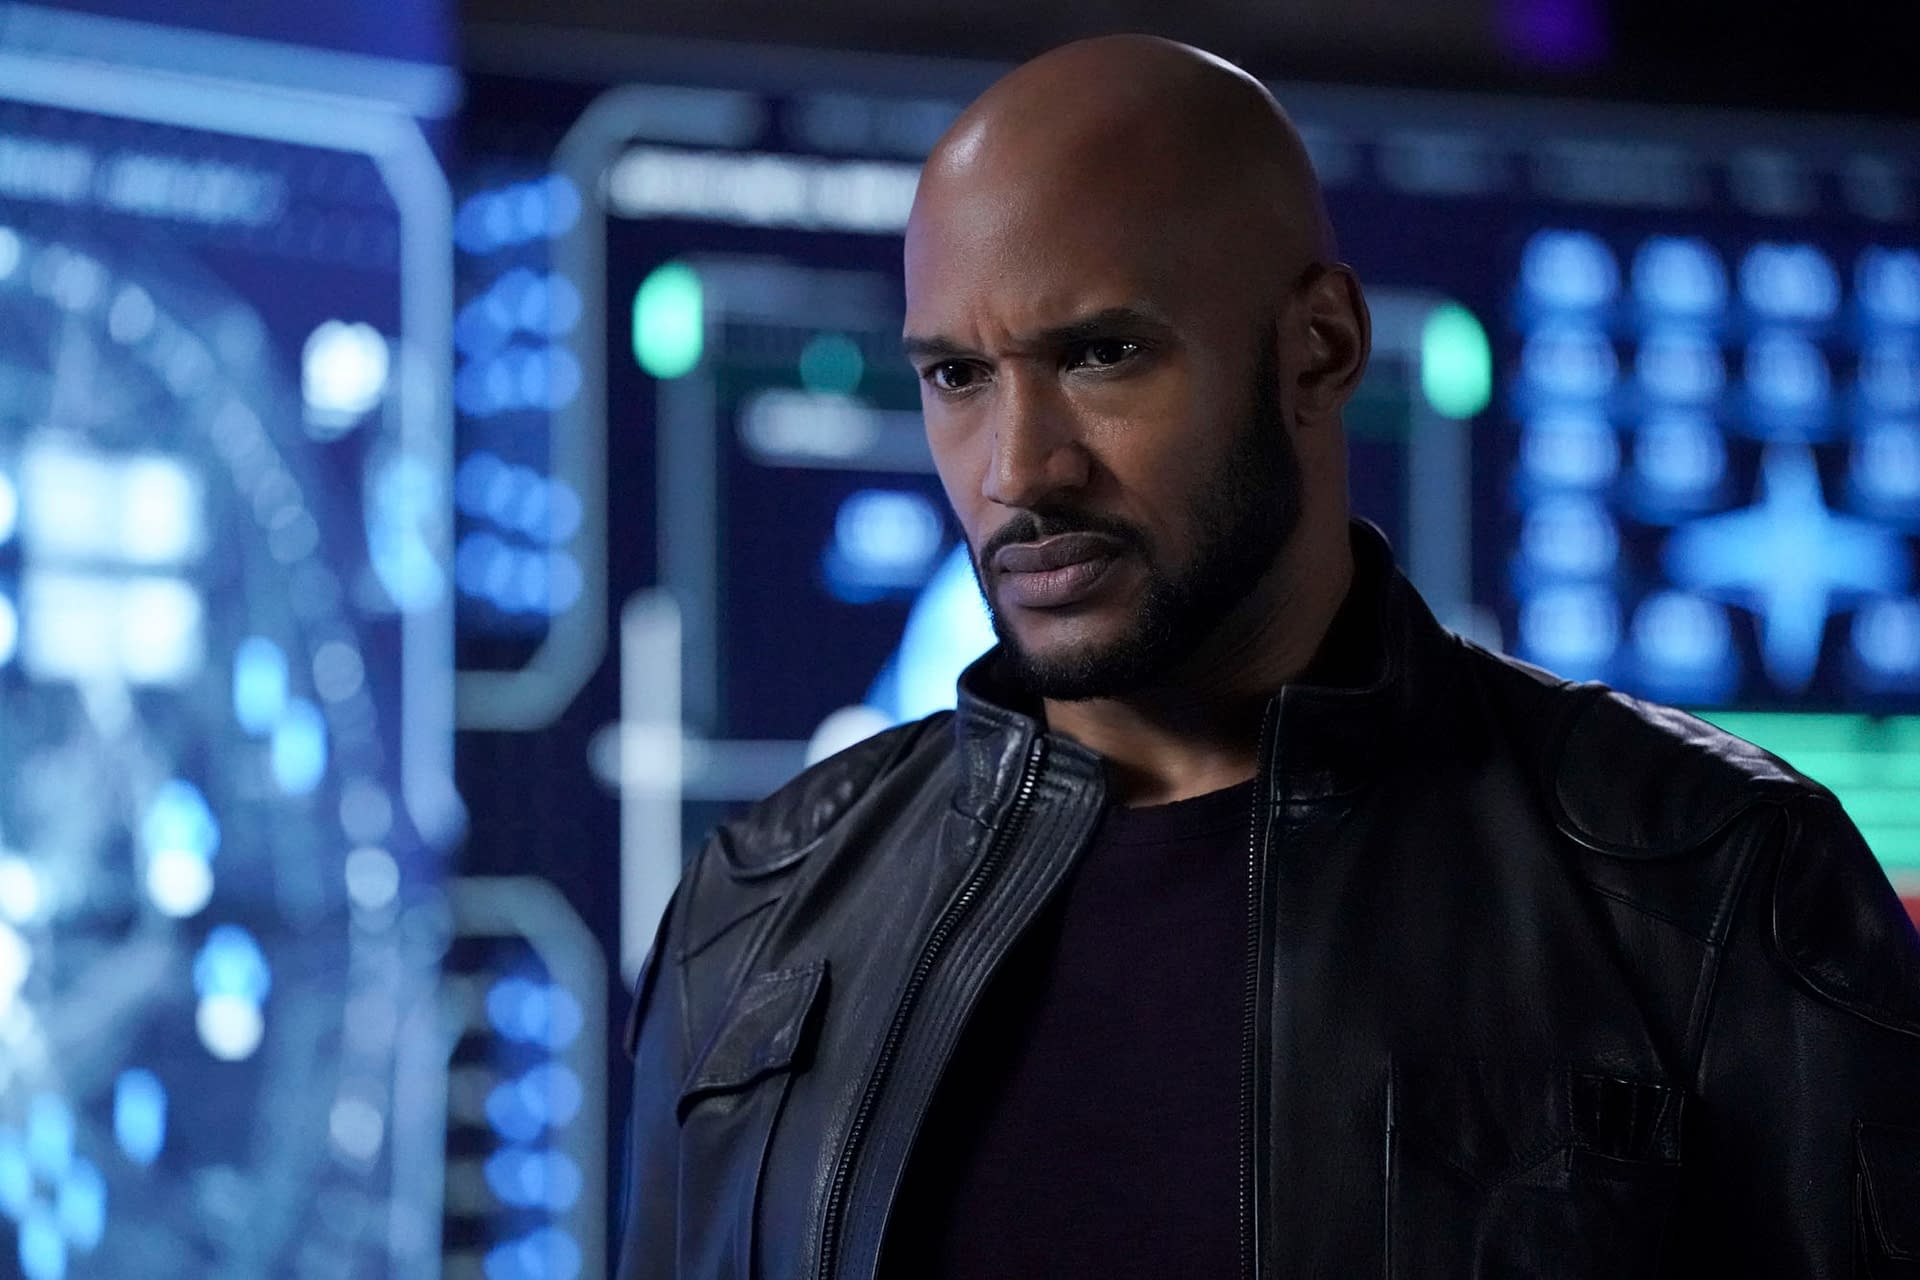 "Marvel's Agents of S.H.I.E.L.D." Season 6, Episode 7 "Toldja": An Apocalypse to Come Home To [PREVIEW]